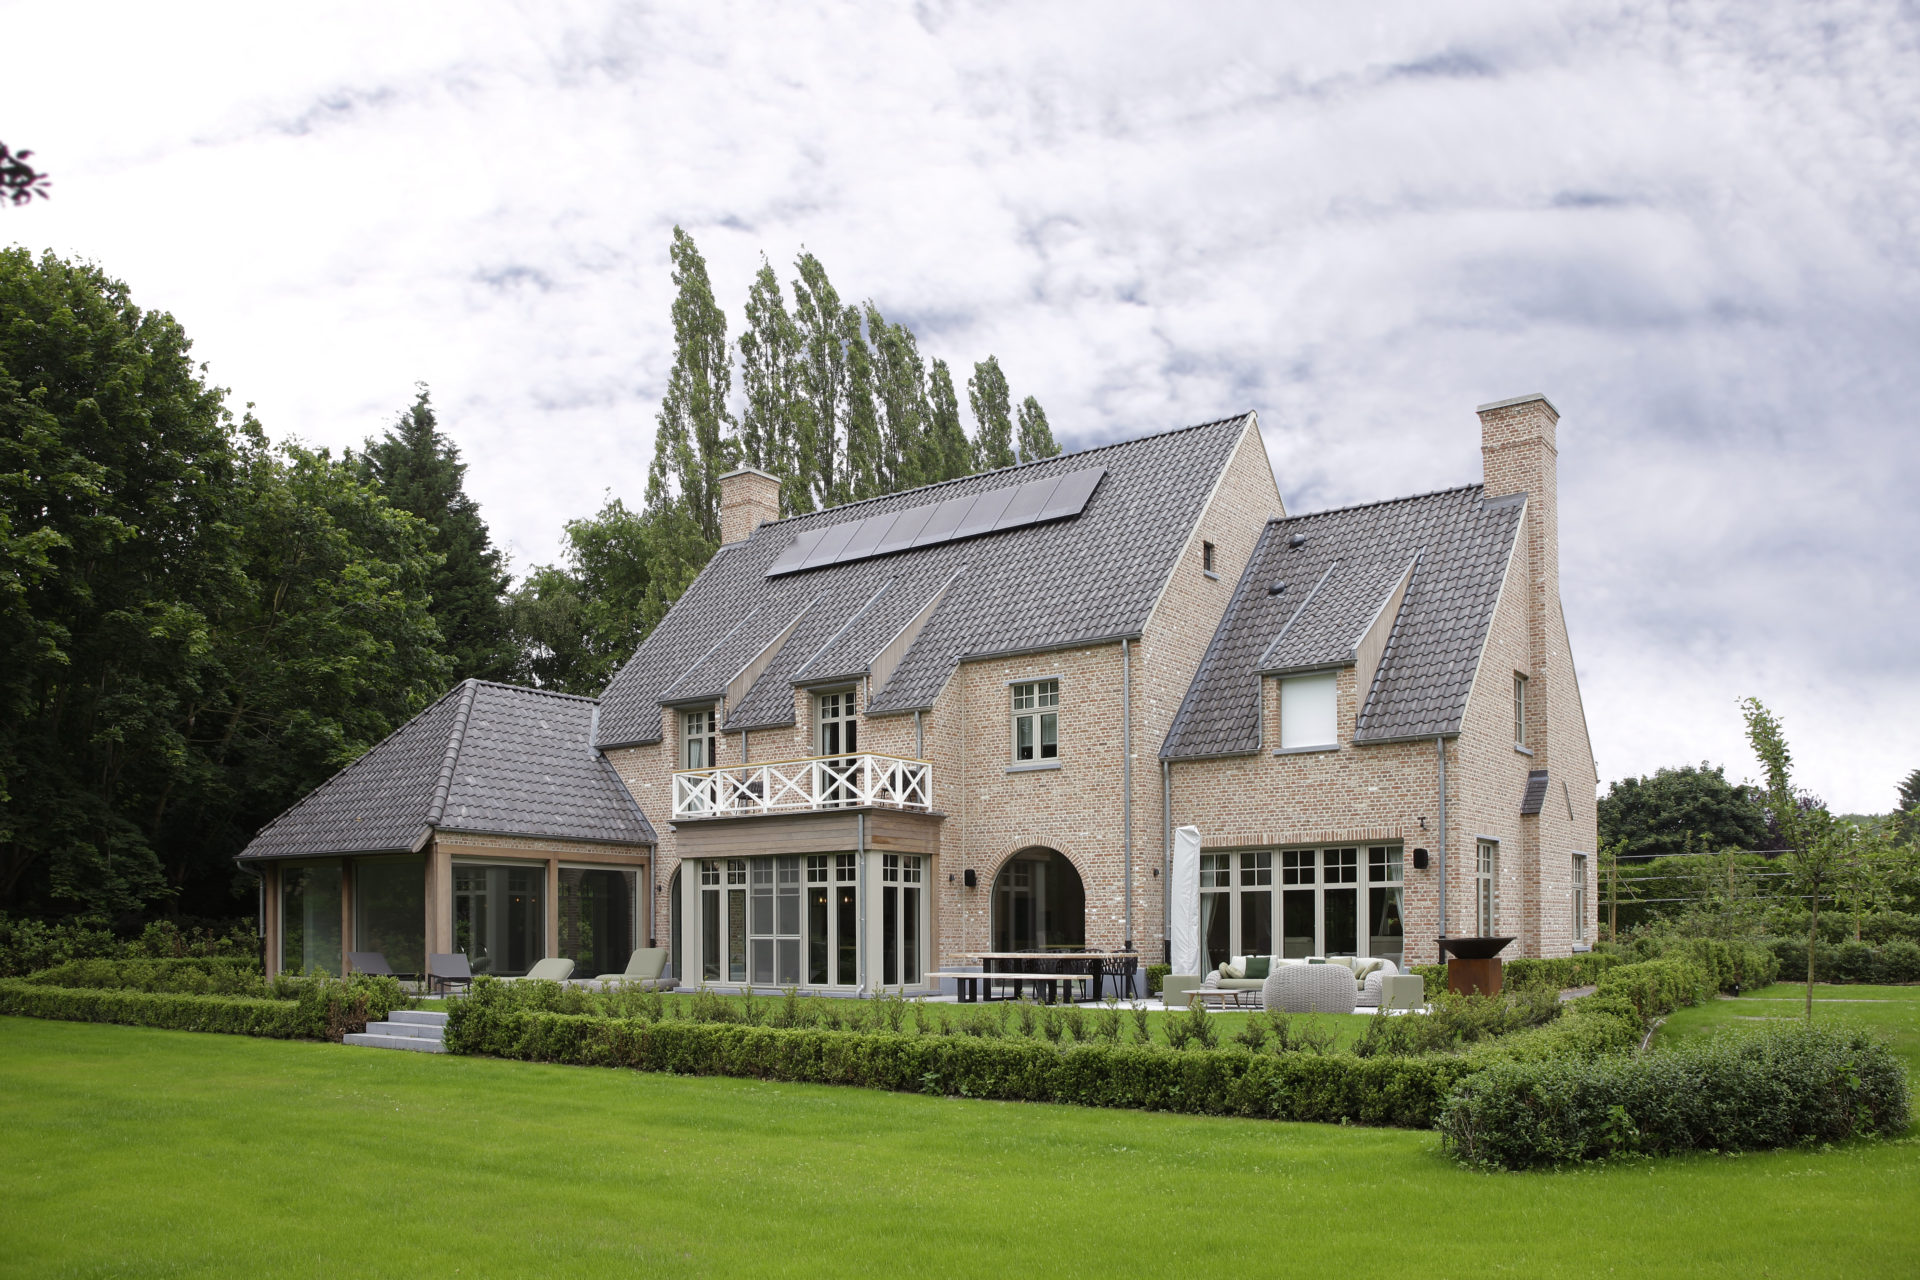 Country-style villa near Bruges - Marcotte Style